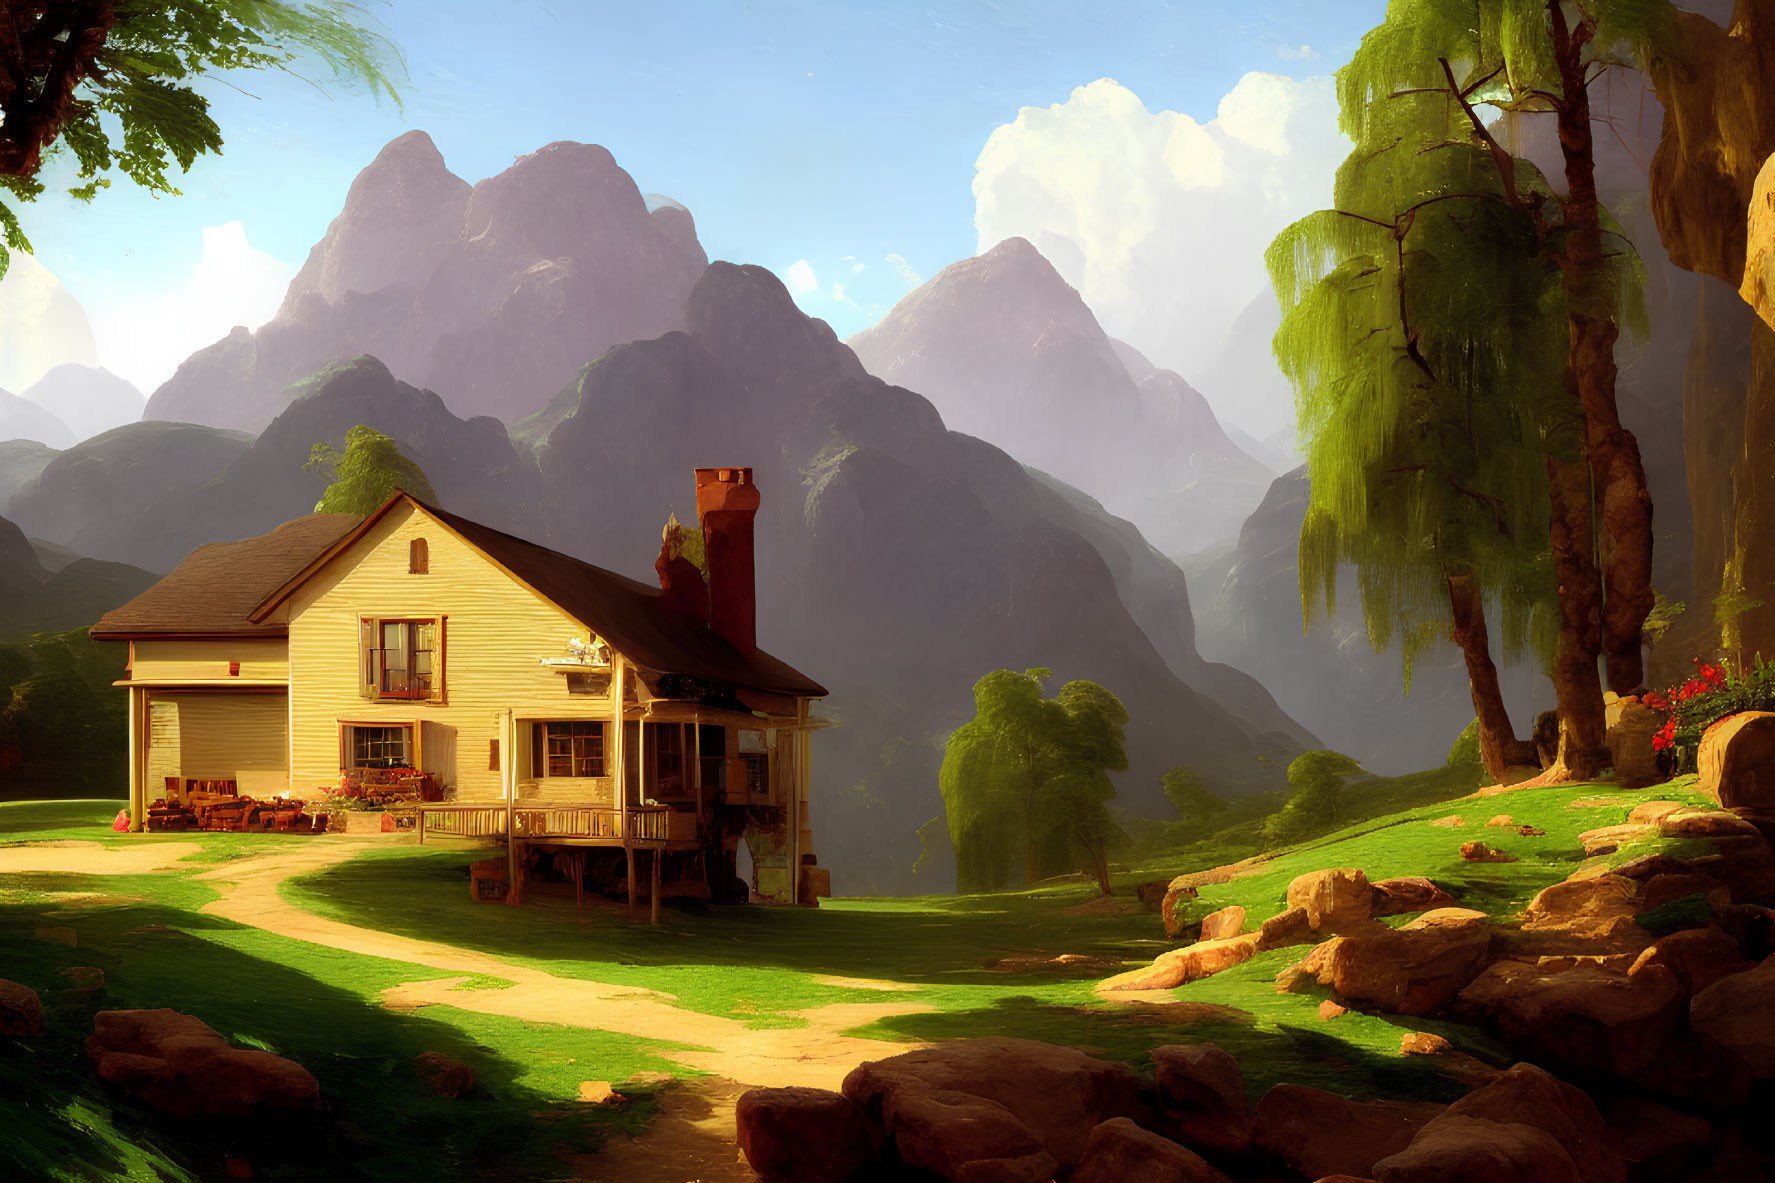 Tranquil landscape with cozy house, lush trees, clear path, misty mountains, warm sky